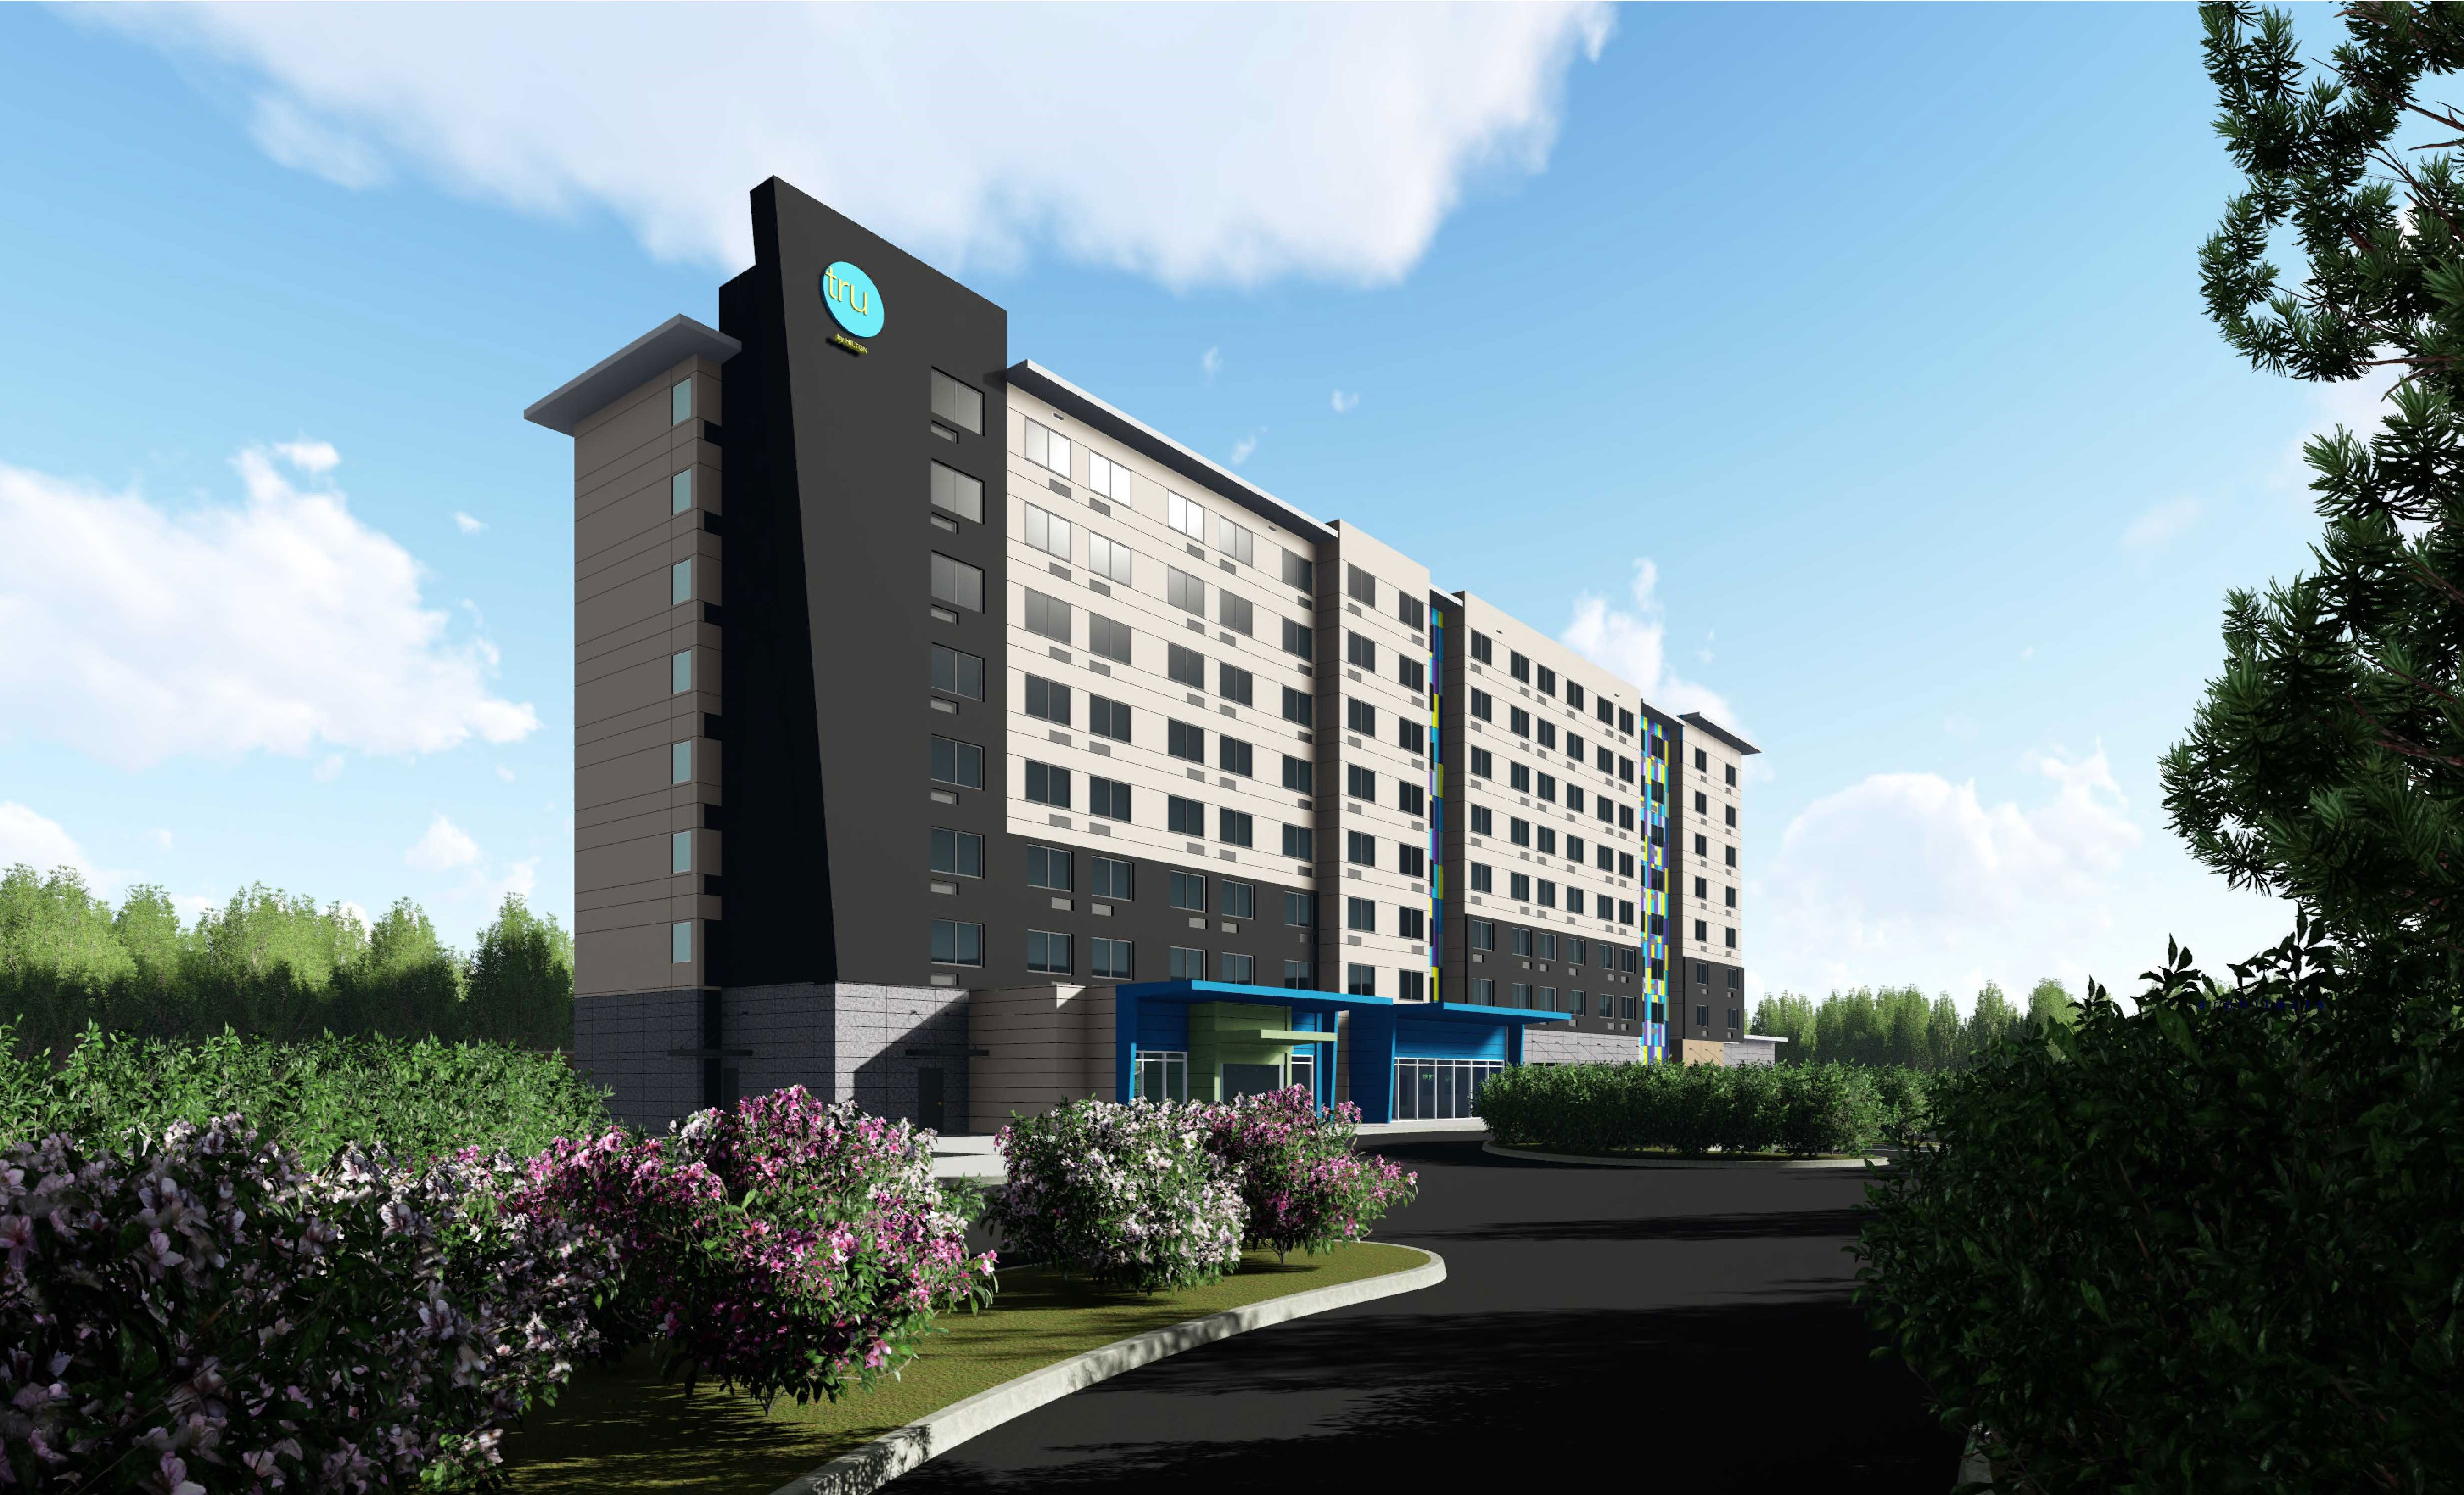 The eight-story 259-suite Tru by Hilton on Westbrook Avenue in Orlando will be located across from the Orange County Conveyo